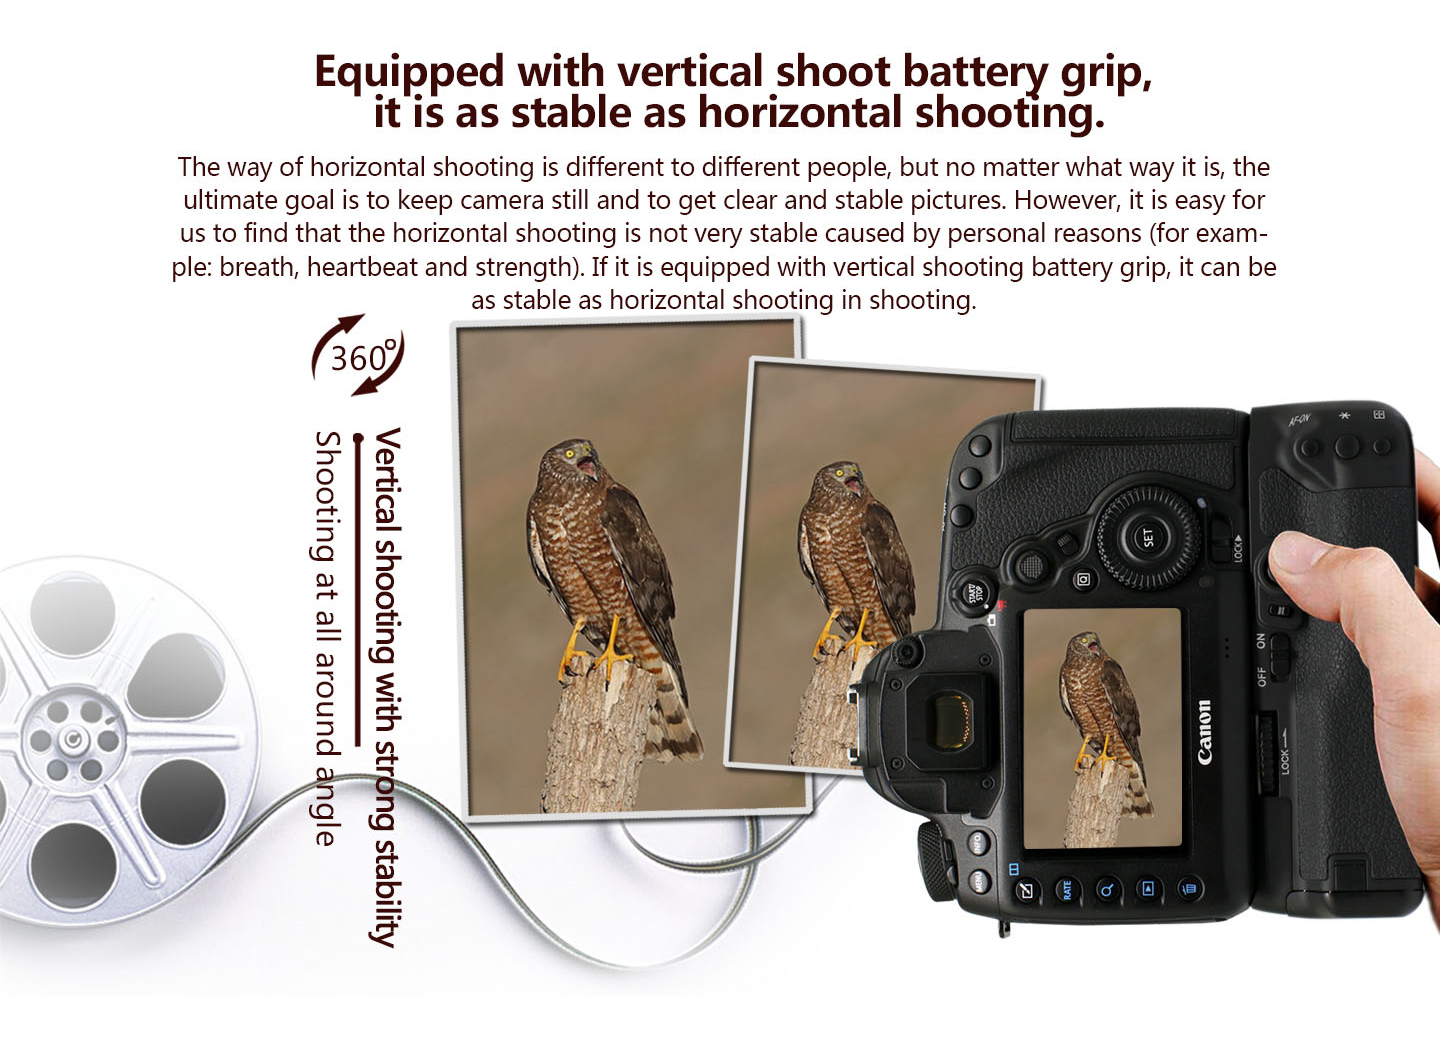 Equipped with certical shoot battery grip, it is as stable as horizontal shooting